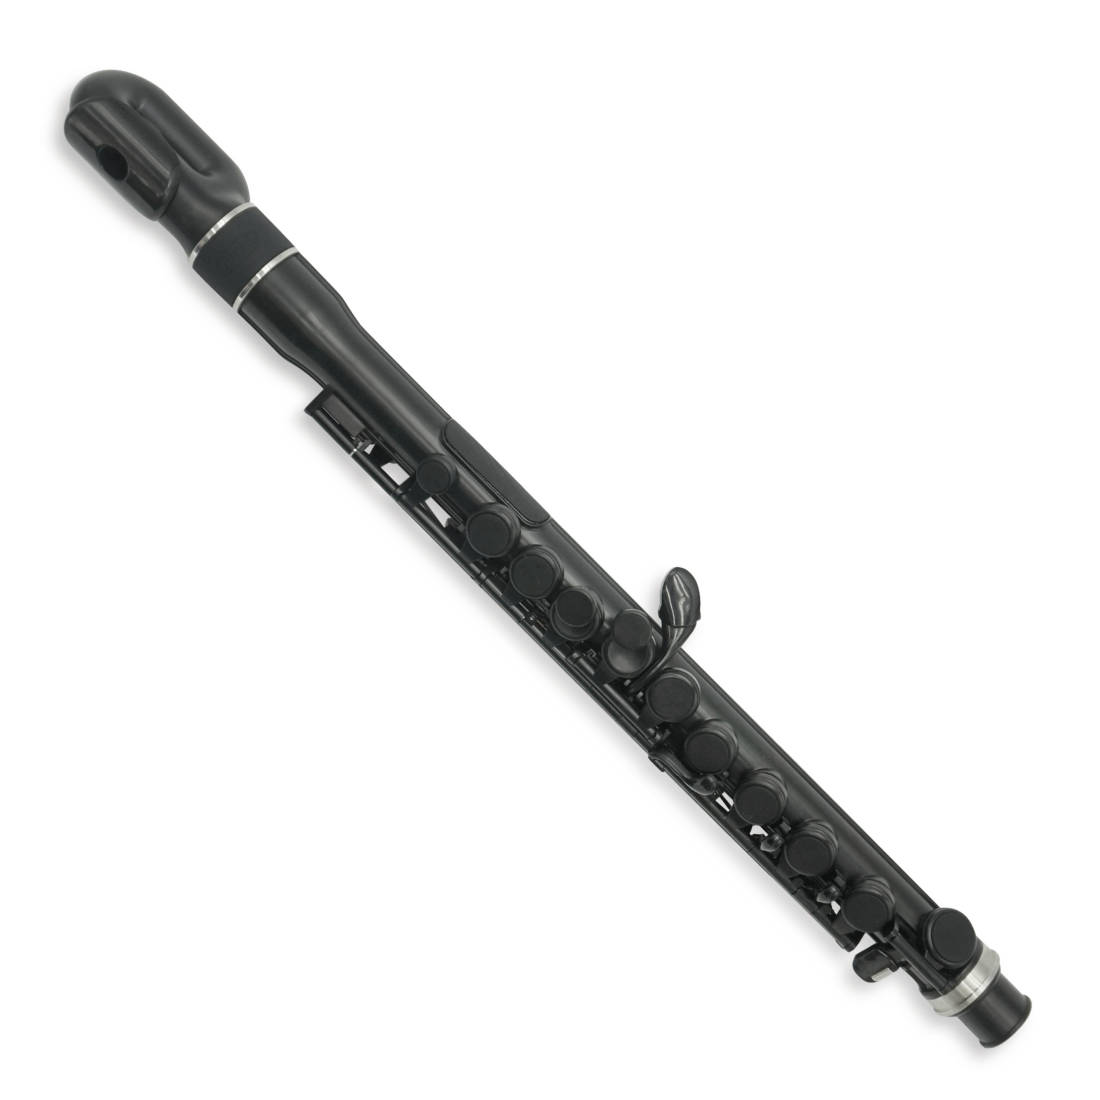 jFlute 2.0 Kit with Donut Head Joint - Black